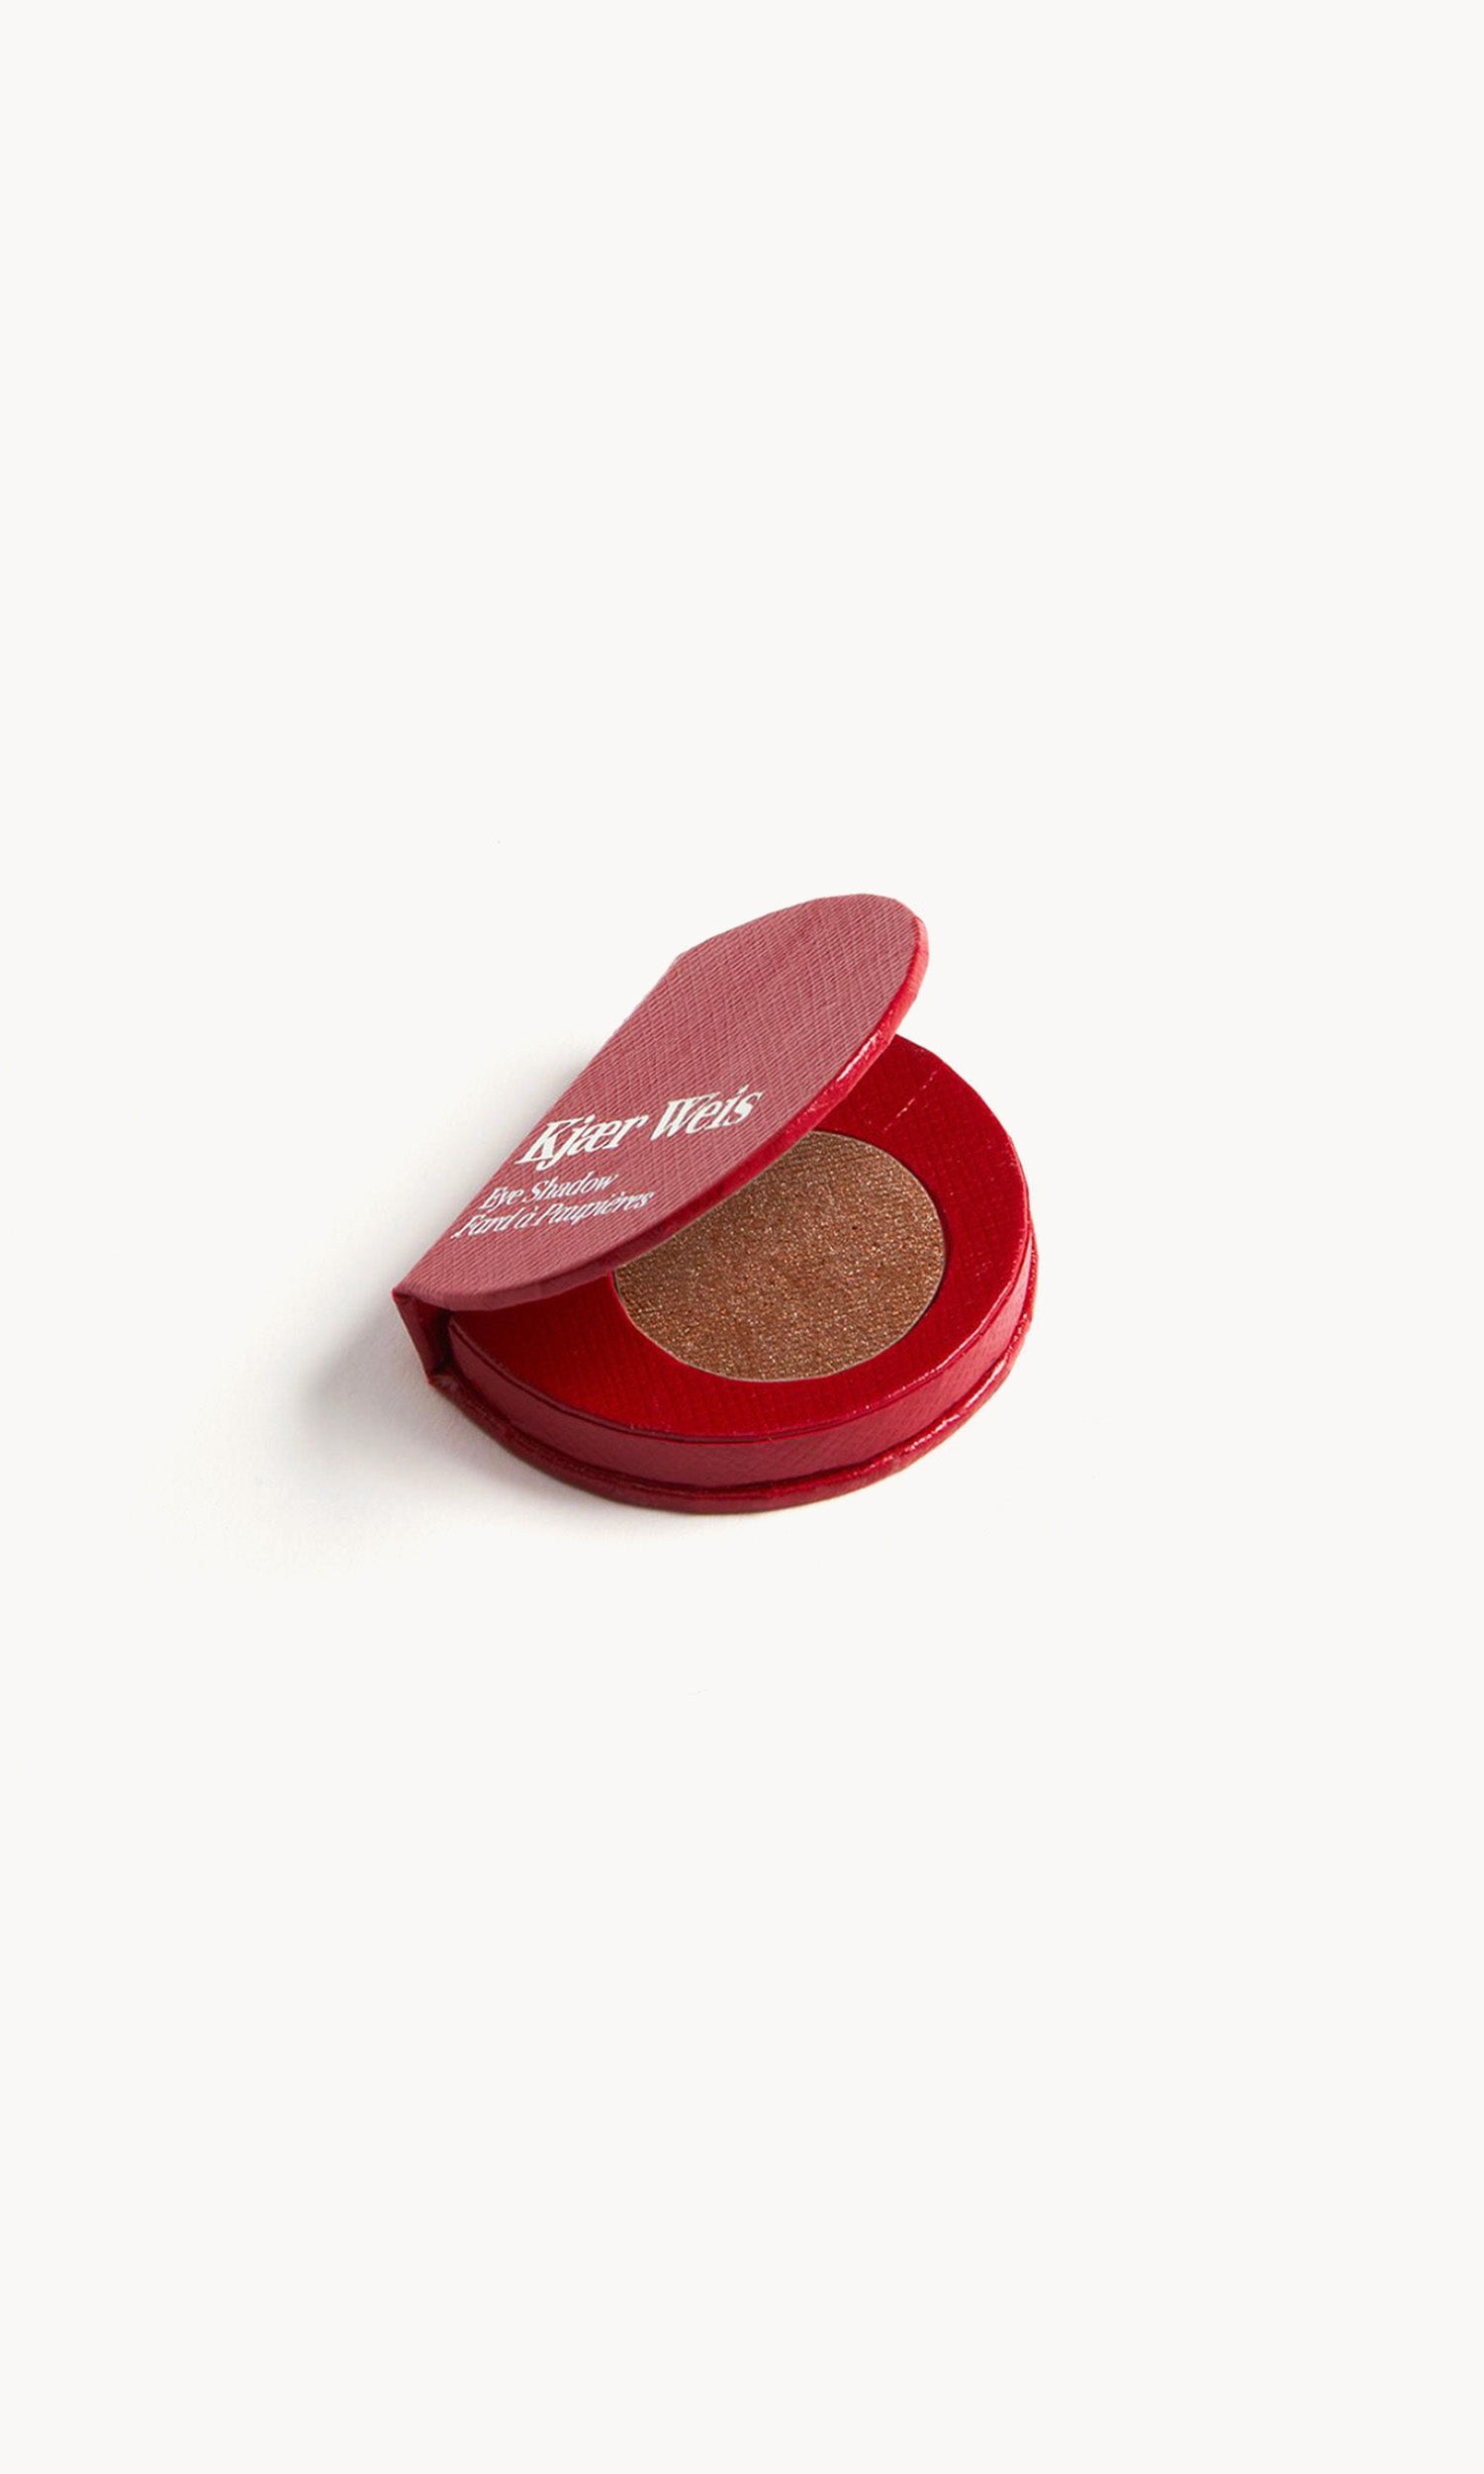 red kw palette open to show the warm brown eye shadow inside